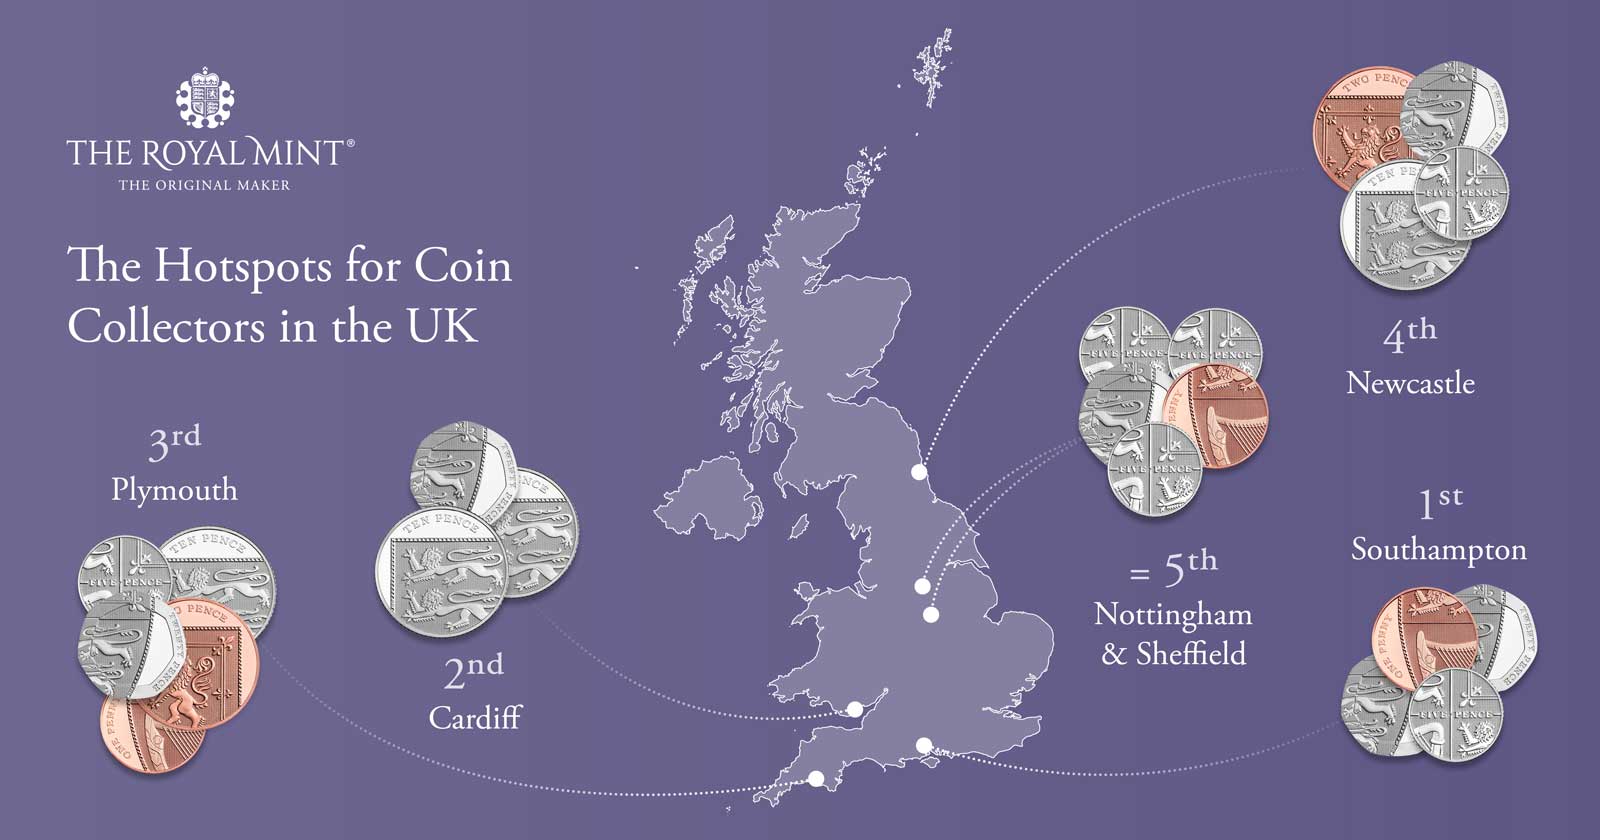 Collect-Week-2022_PR-Infographic_Coin-Collectors-01.jpg